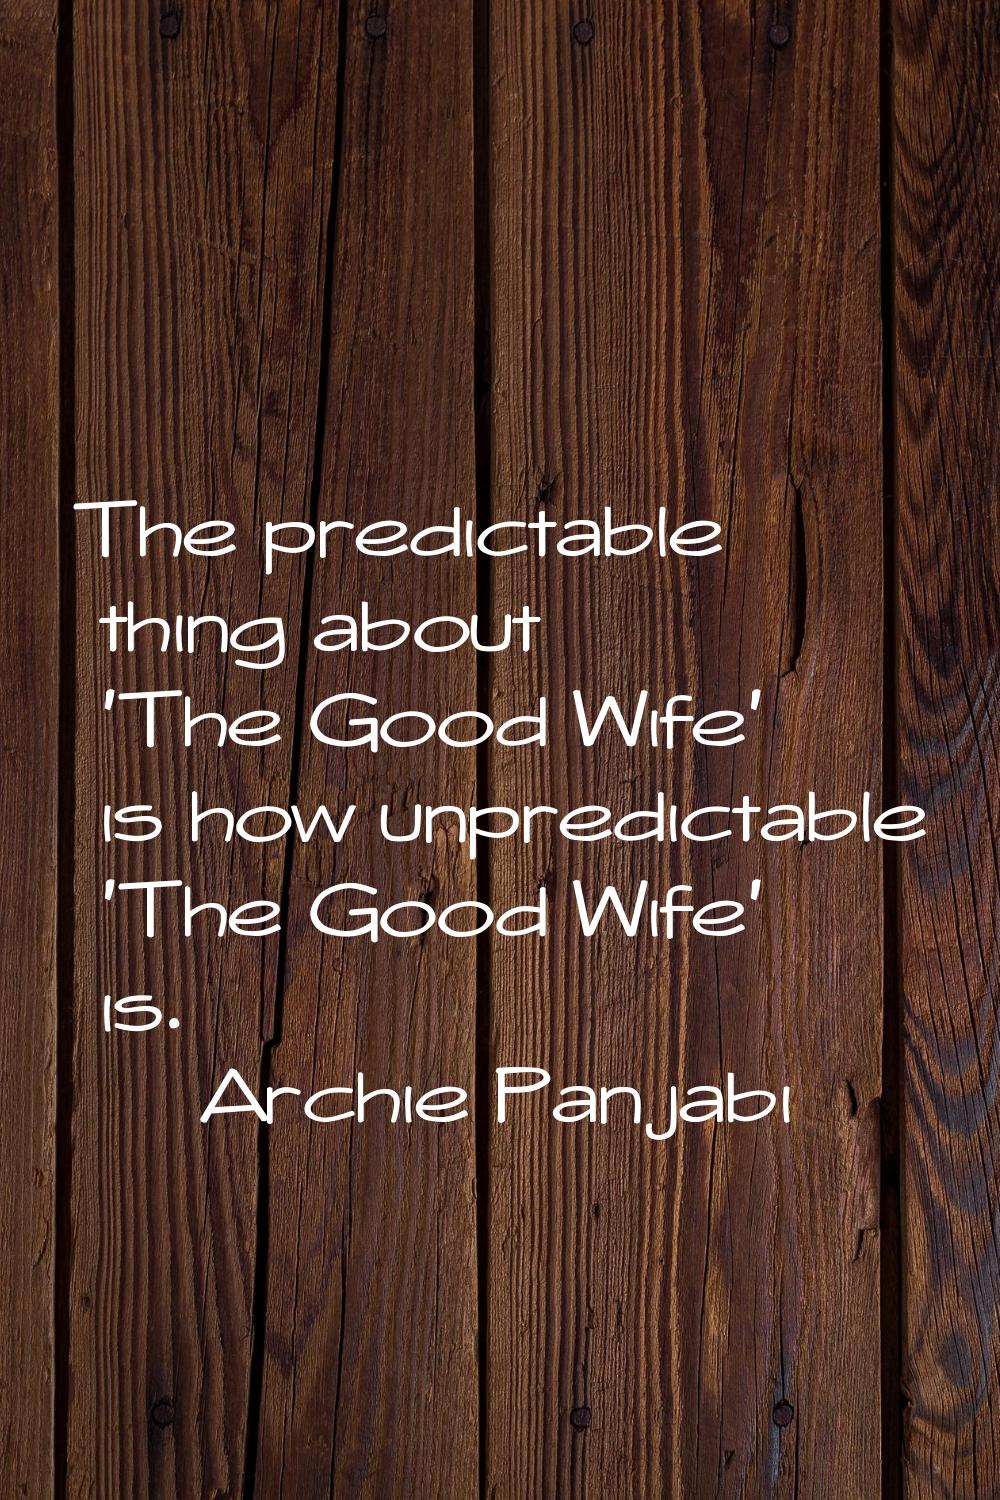 The predictable thing about 'The Good Wife' is how unpredictable 'The Good Wife' is.